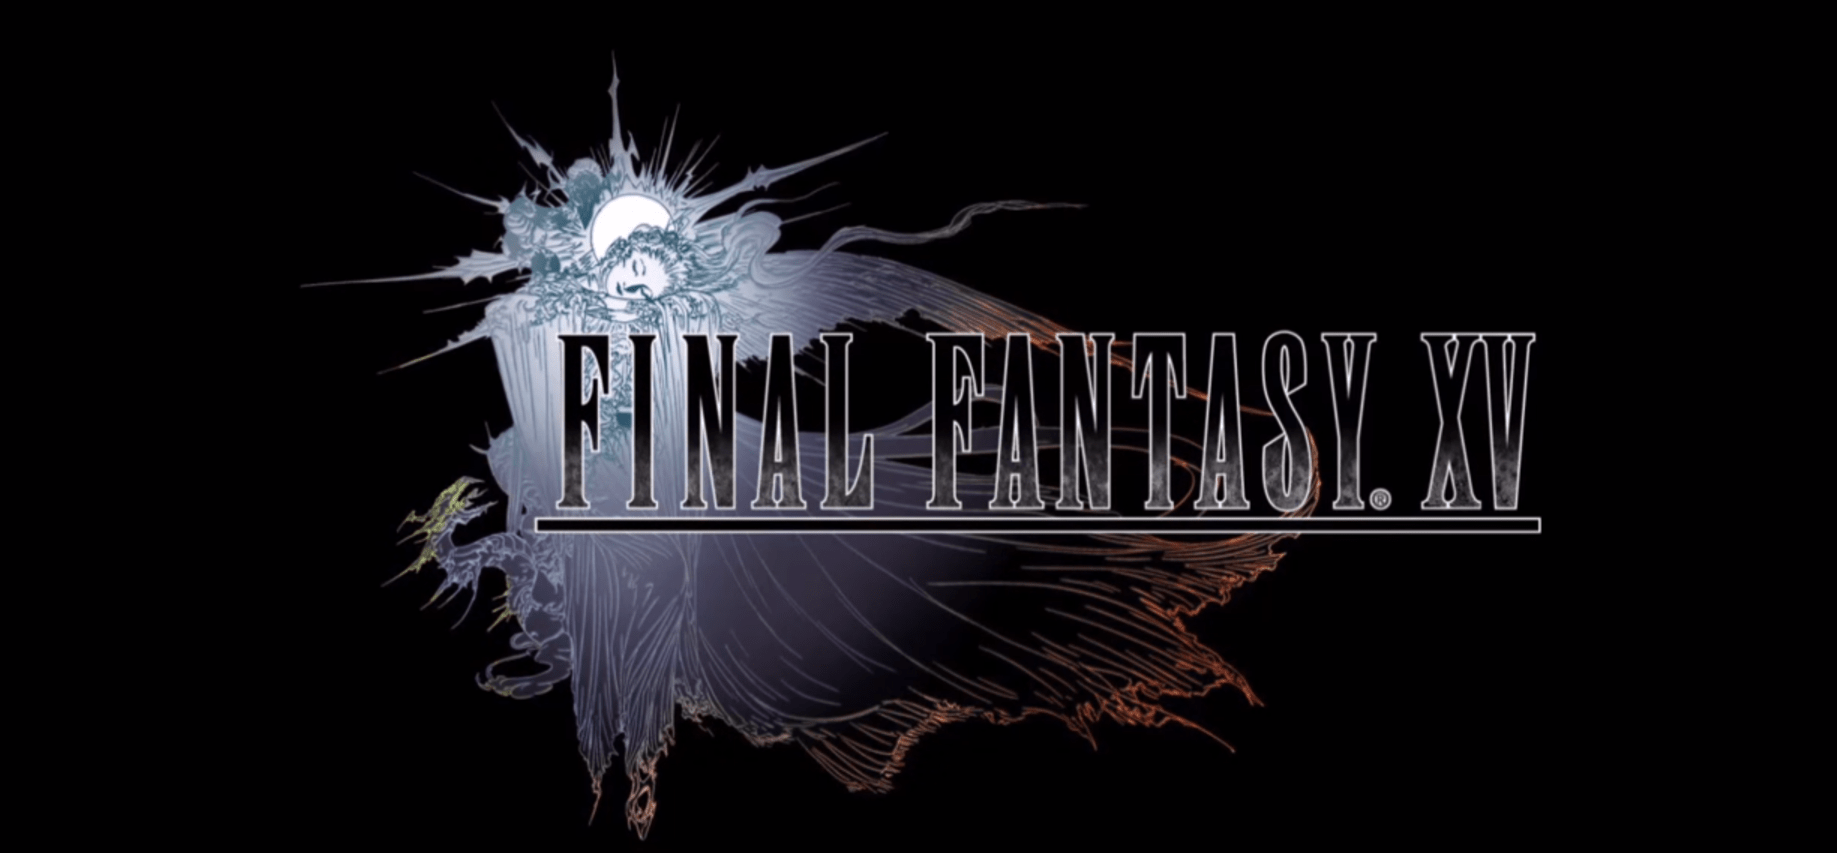 Final Fantasy XV: The Dawn of the Future, English Edition, Is Headed To Bookshelves This Summer